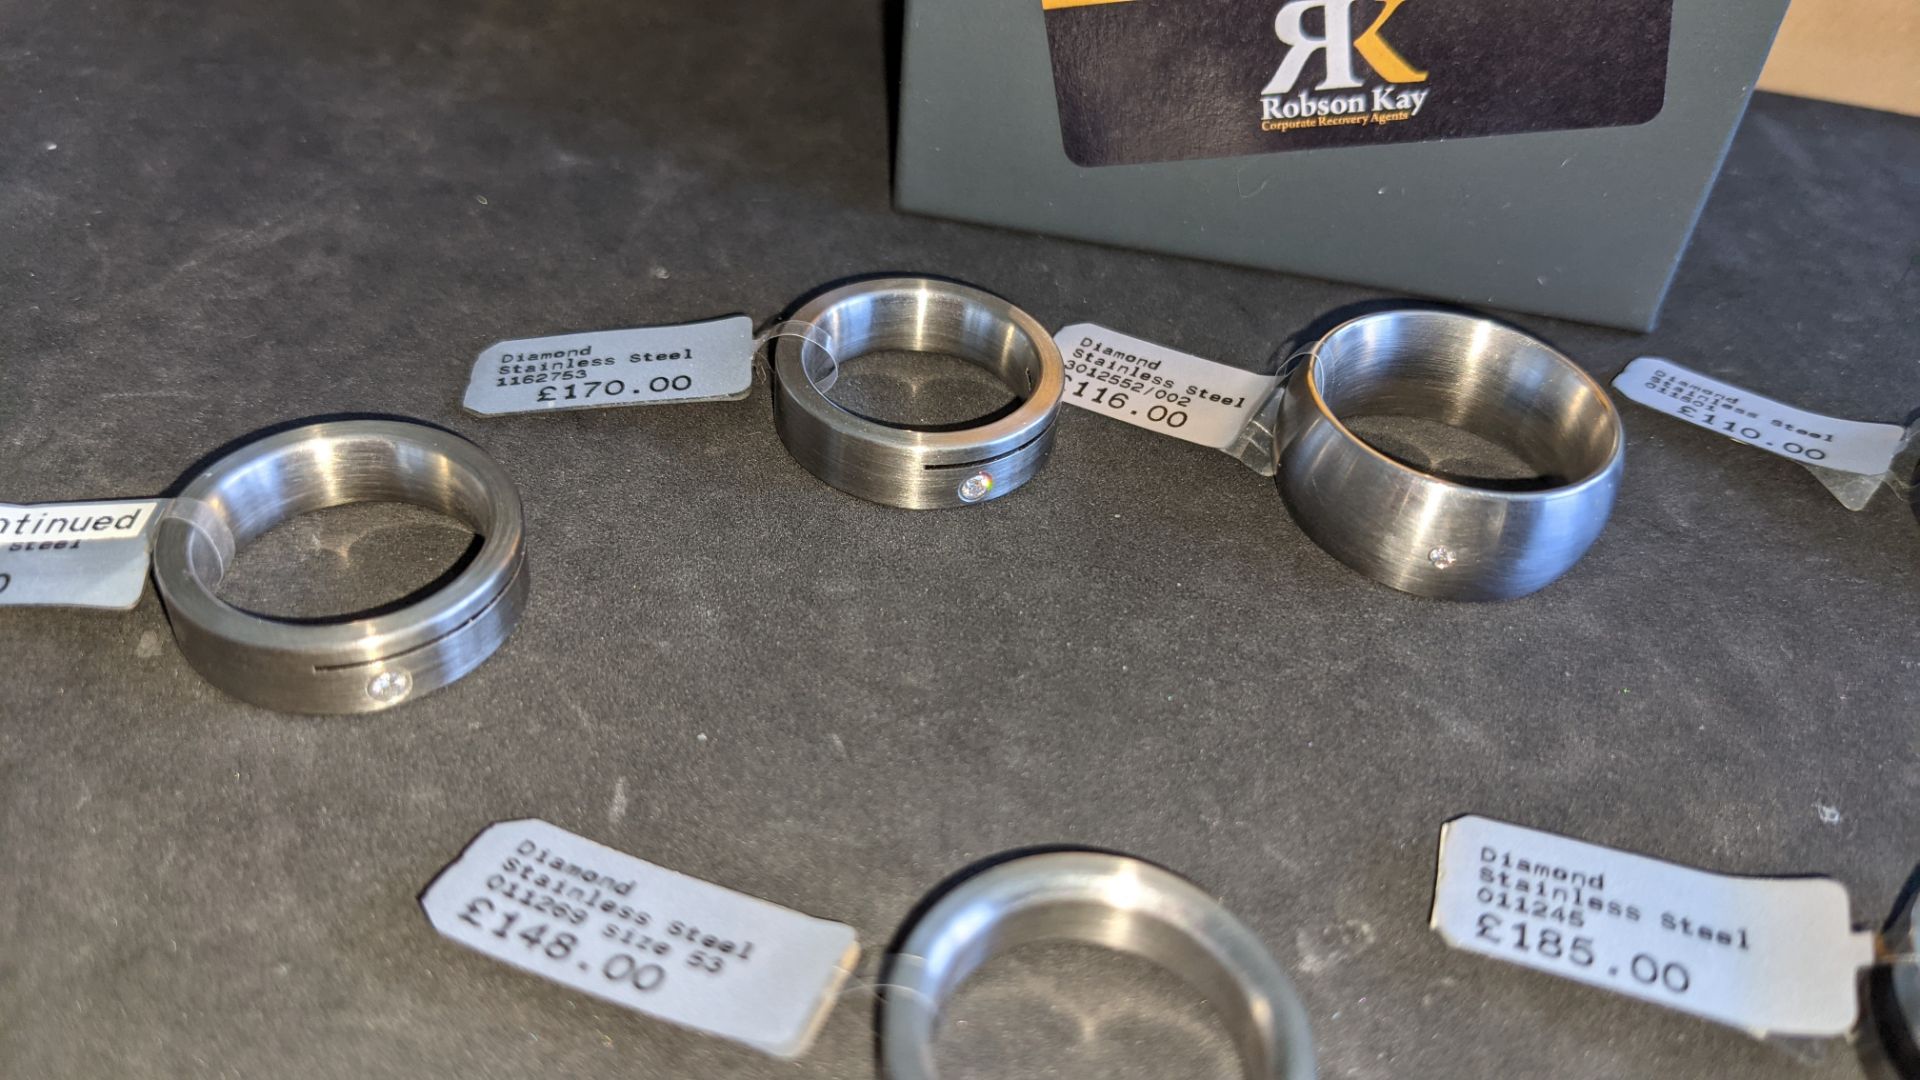 7 off assorted stainless steel & diamond rings. RRPs from £110 - £185. Total RRP £1,089 - Image 8 of 12